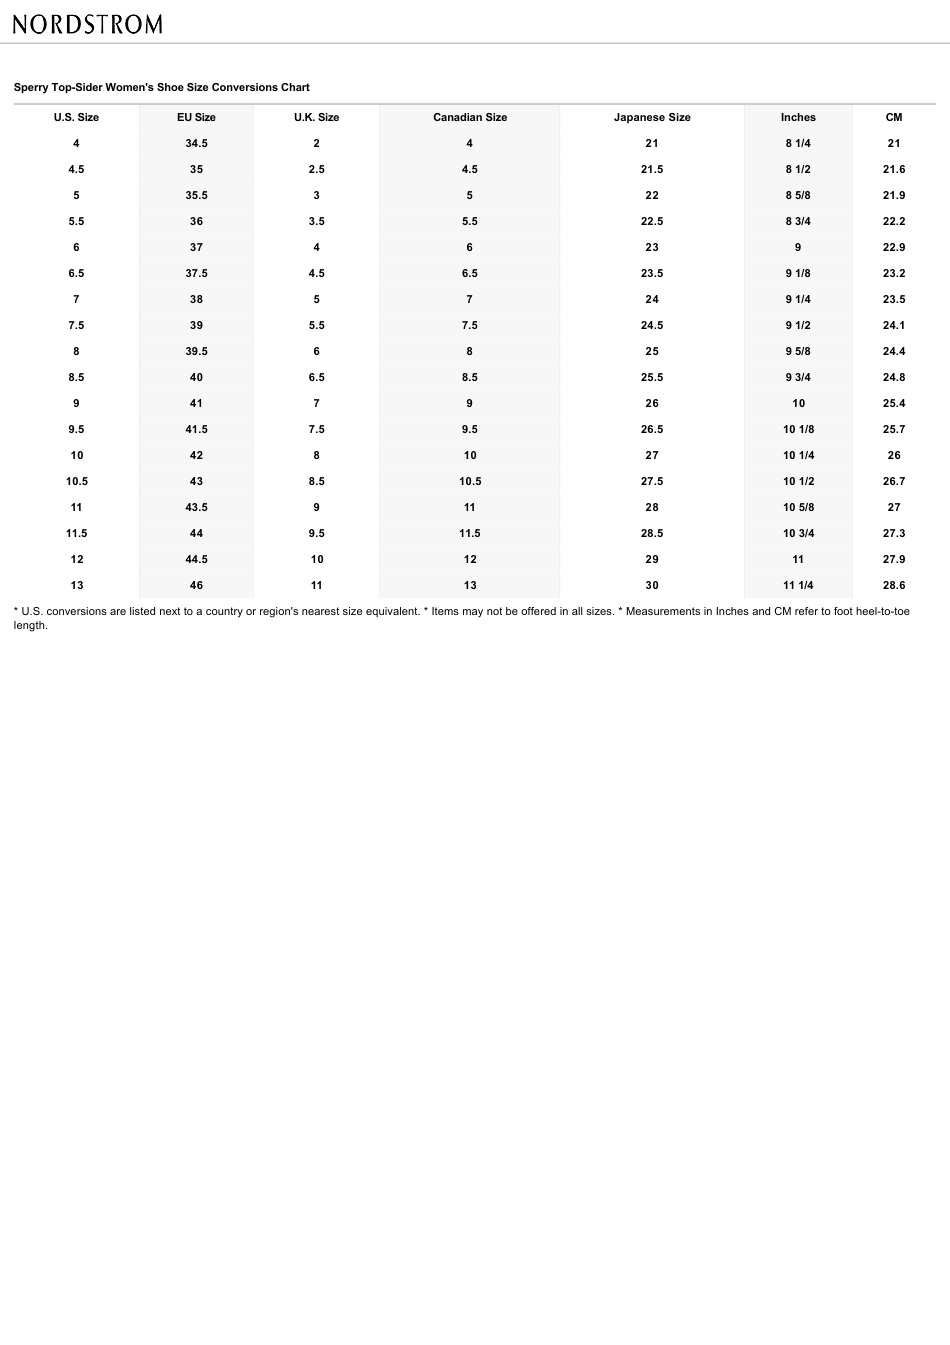 Womens Shoe Size Conversions Chart - Sperry Top-Sider, Page 1